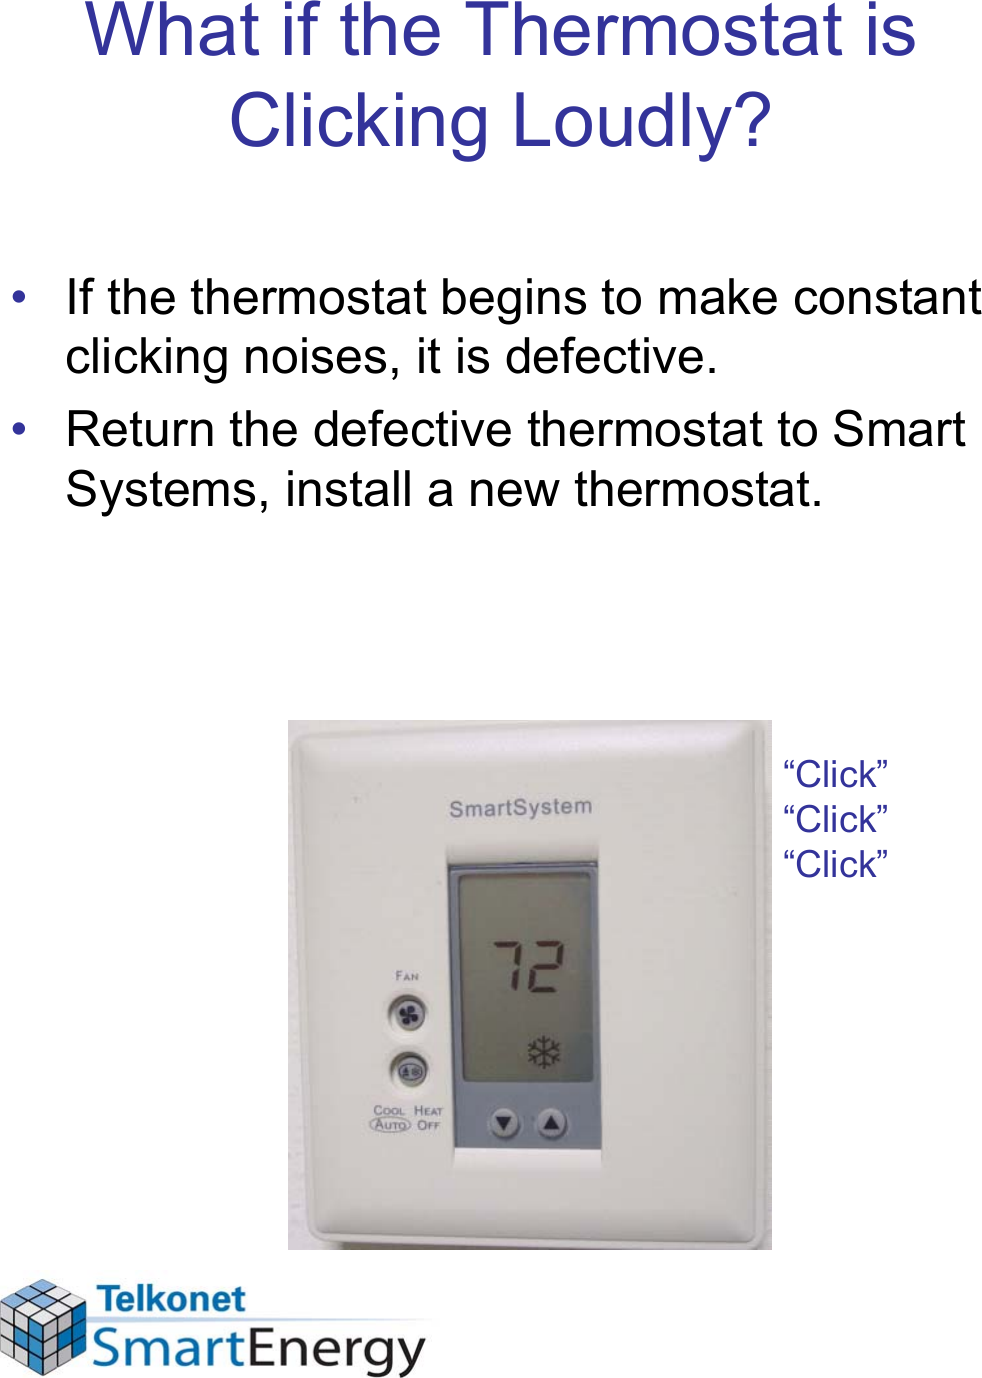 What if the Thermostat is Clicking Loudly?• If the thermostat begins to make constant clicking noises, it is defective. • Return the defective thermostat to Smart Systems, install a new thermostat.“Click”“Click”“Click”